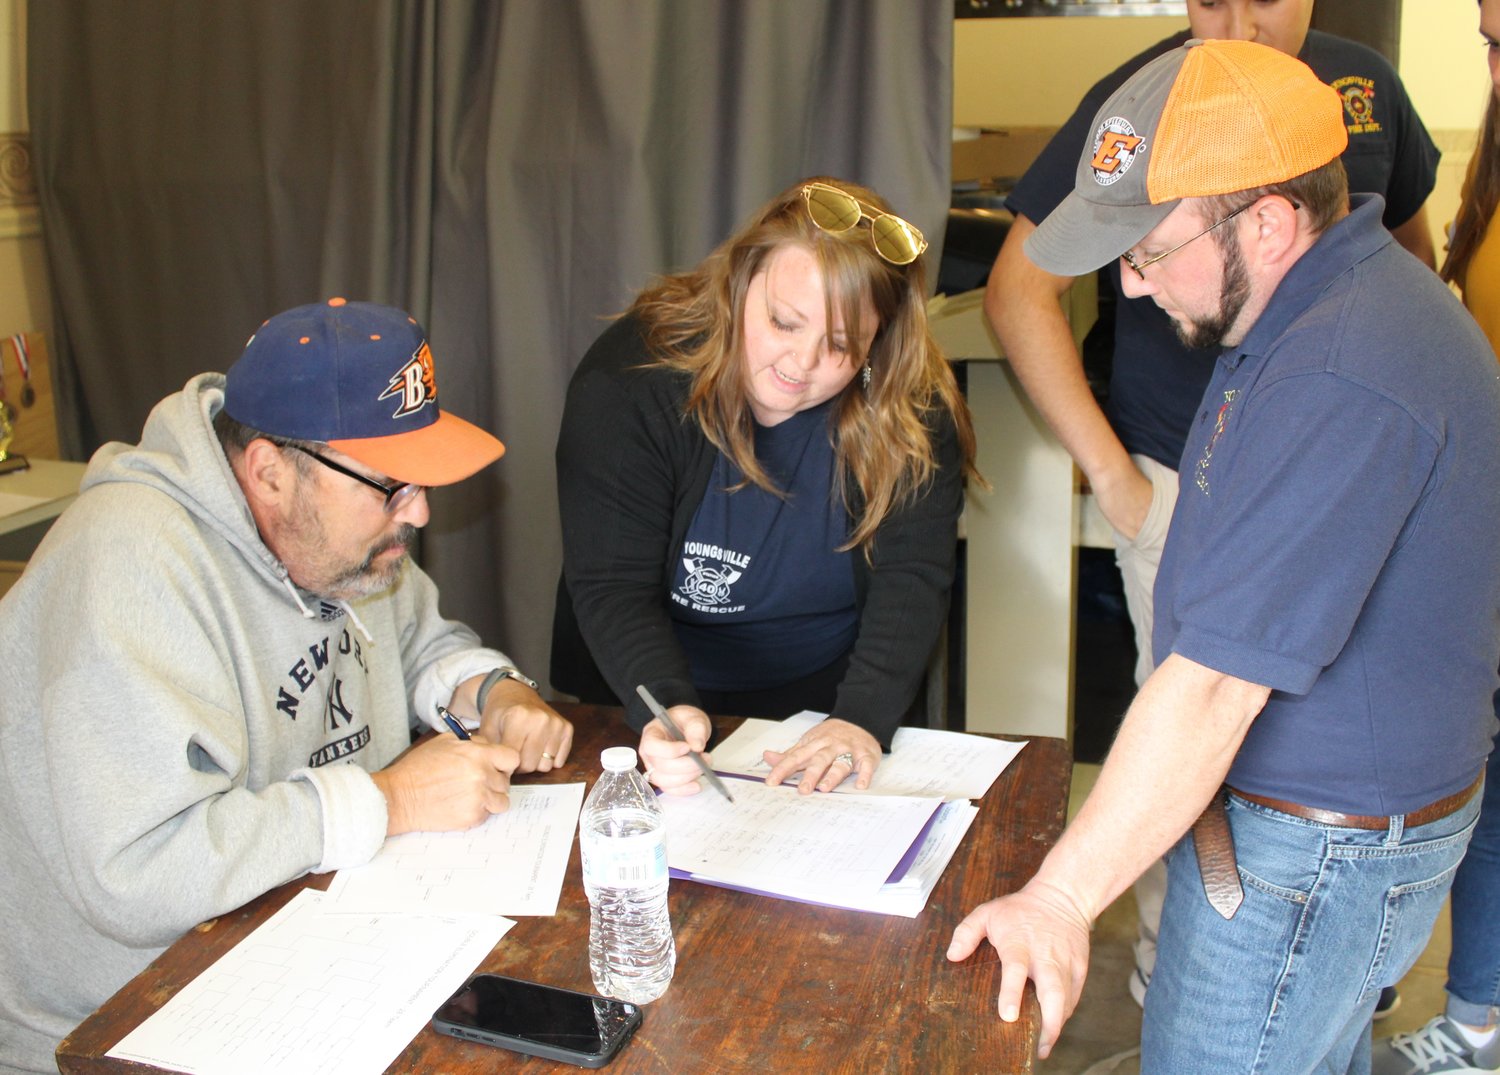 Behind the scenes of every successful event are volunteers who helped with the Youngsville Fire Department Cornhole Classic Tournament. They are, from the left, Rick Ellison, keeping the stats, Amber Creegan, helping with stats and Jonathan McGibbon, one of the tournament organizers.